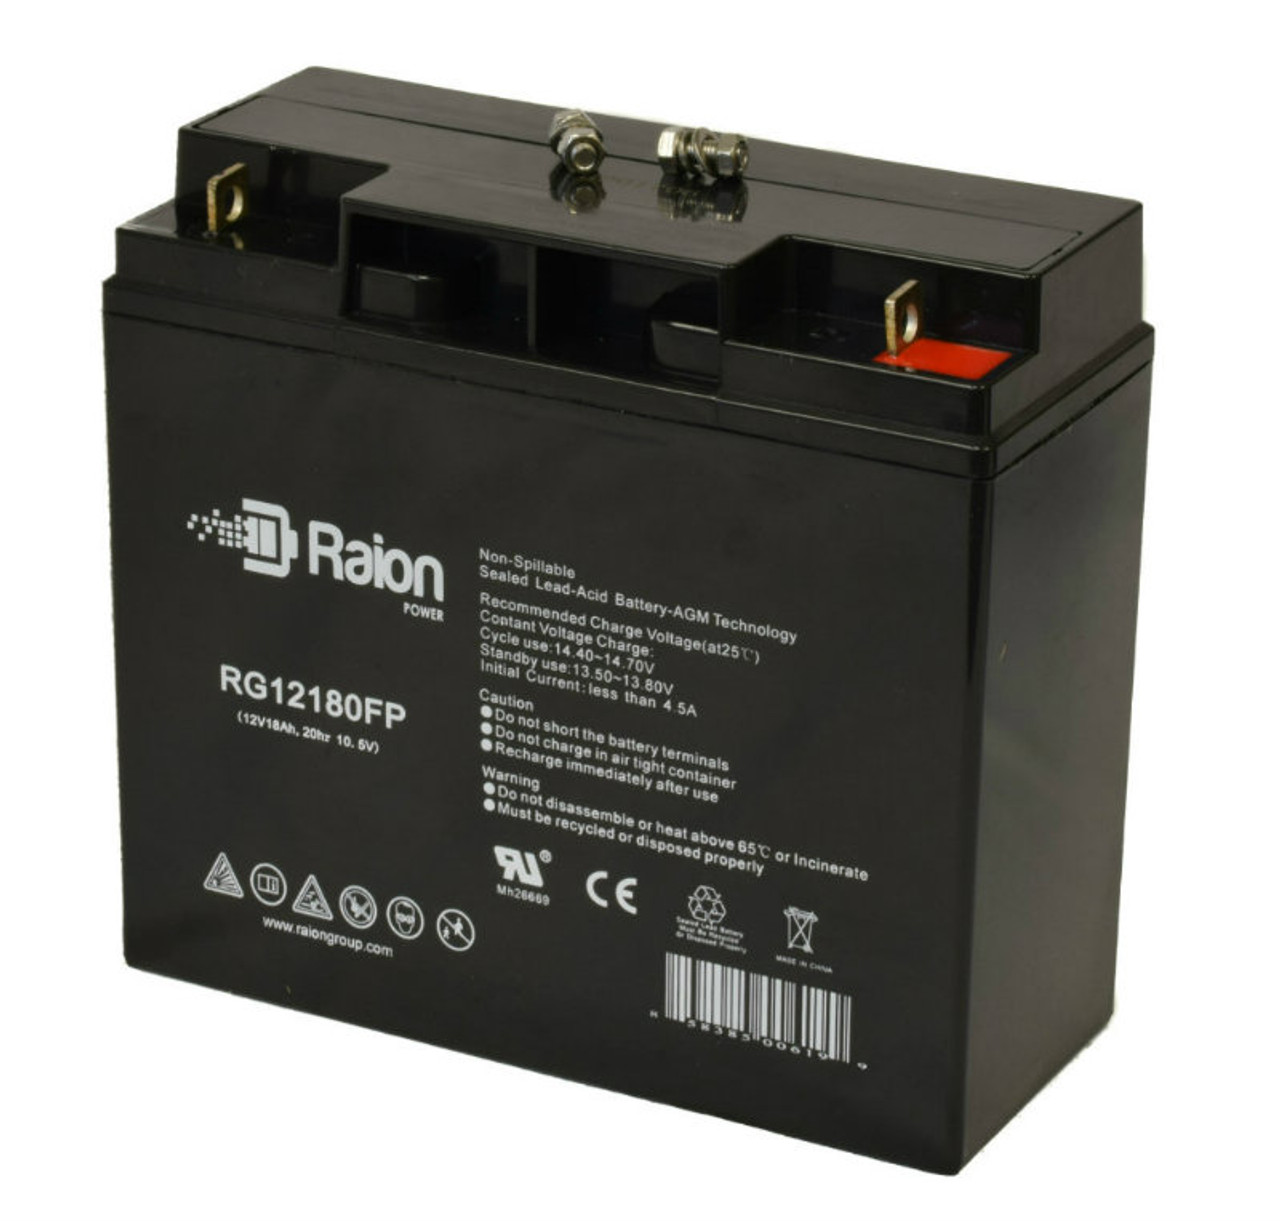 Raion Power Replacement 12V 18Ah Battery for Long Way LW-6FM18AJ - 1 Pack